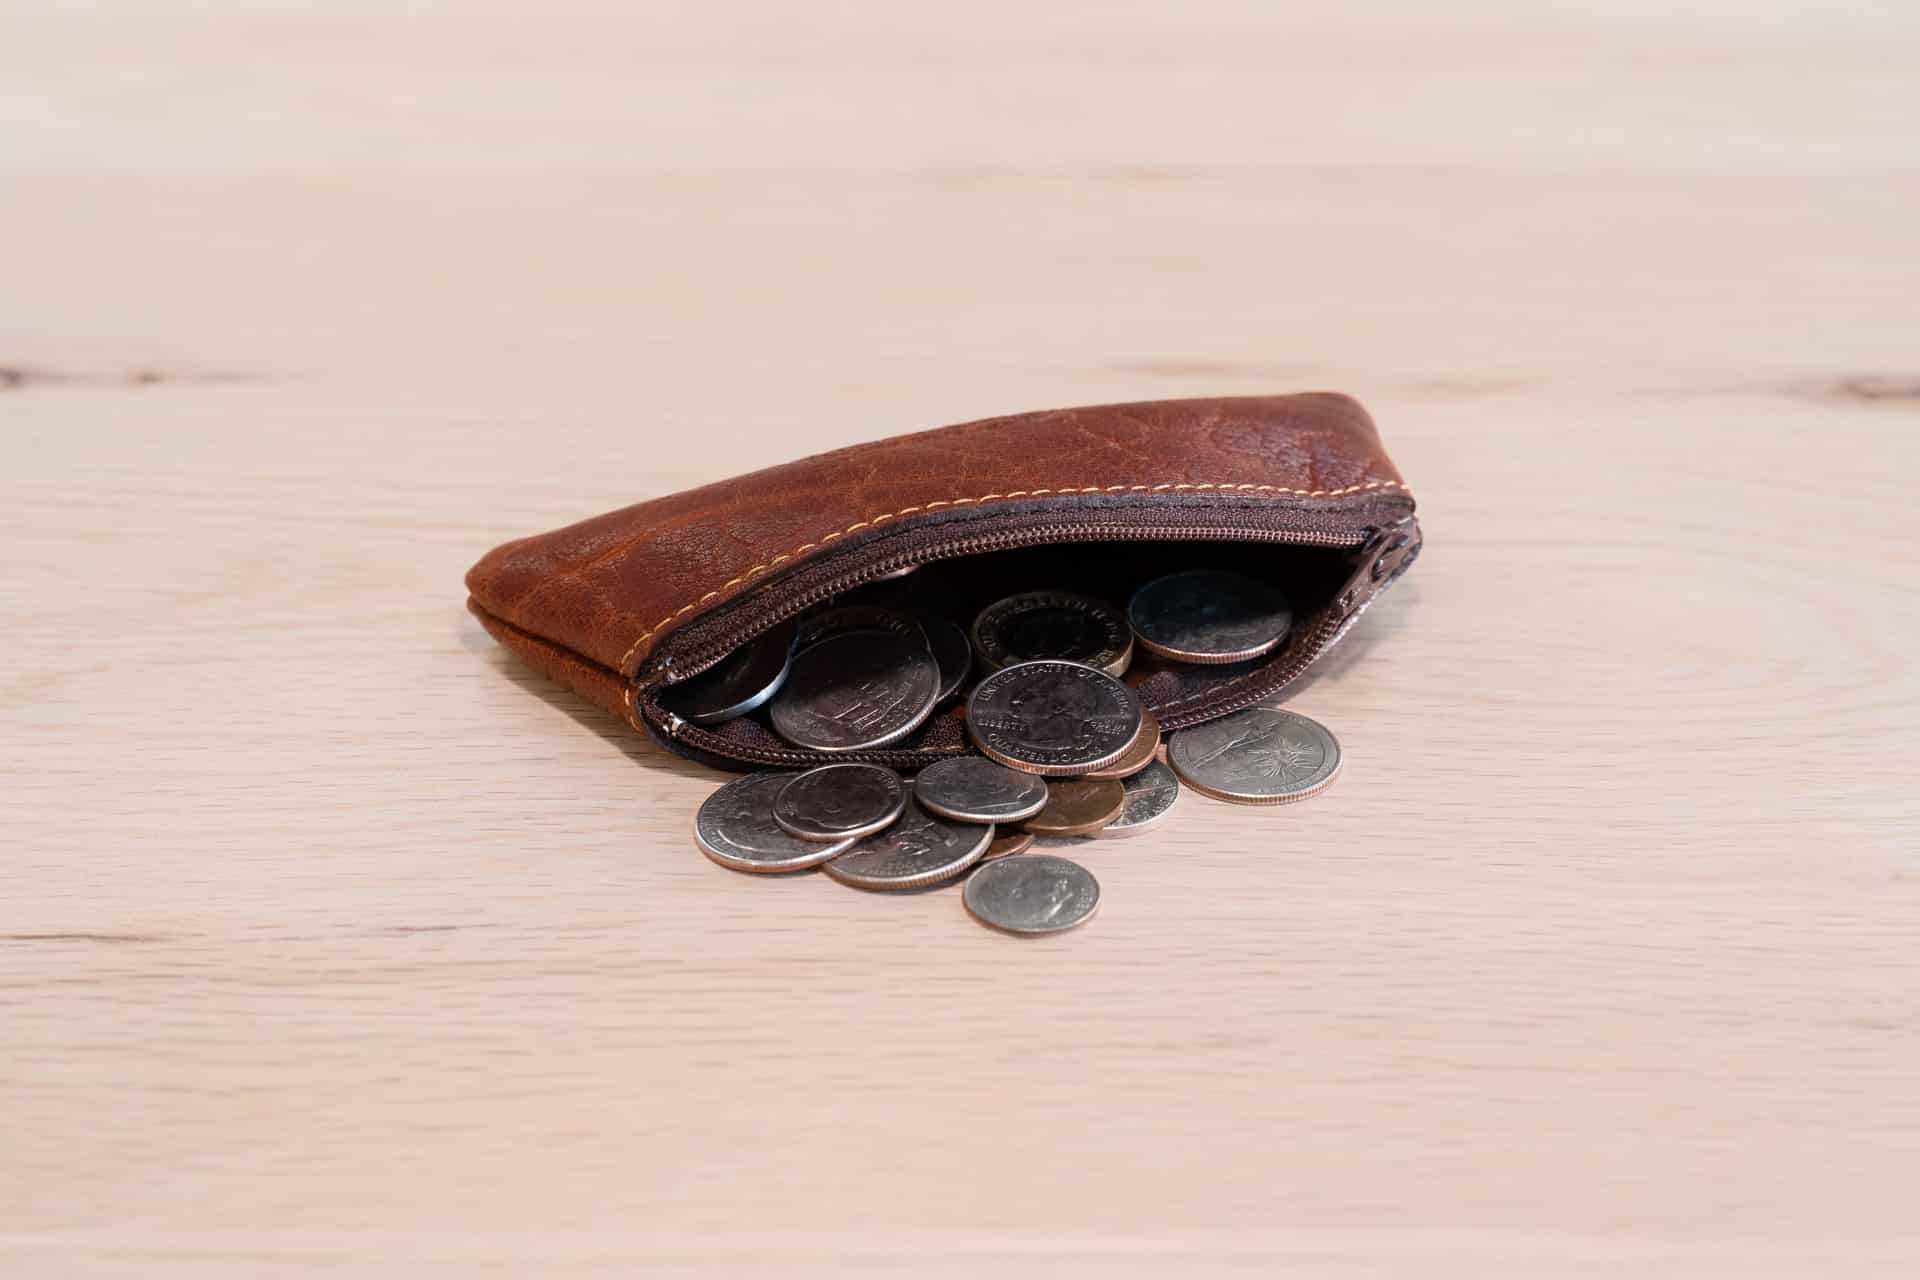 Leather Coin Purse with Zipper - Black, Brown, Red - American Chestnut